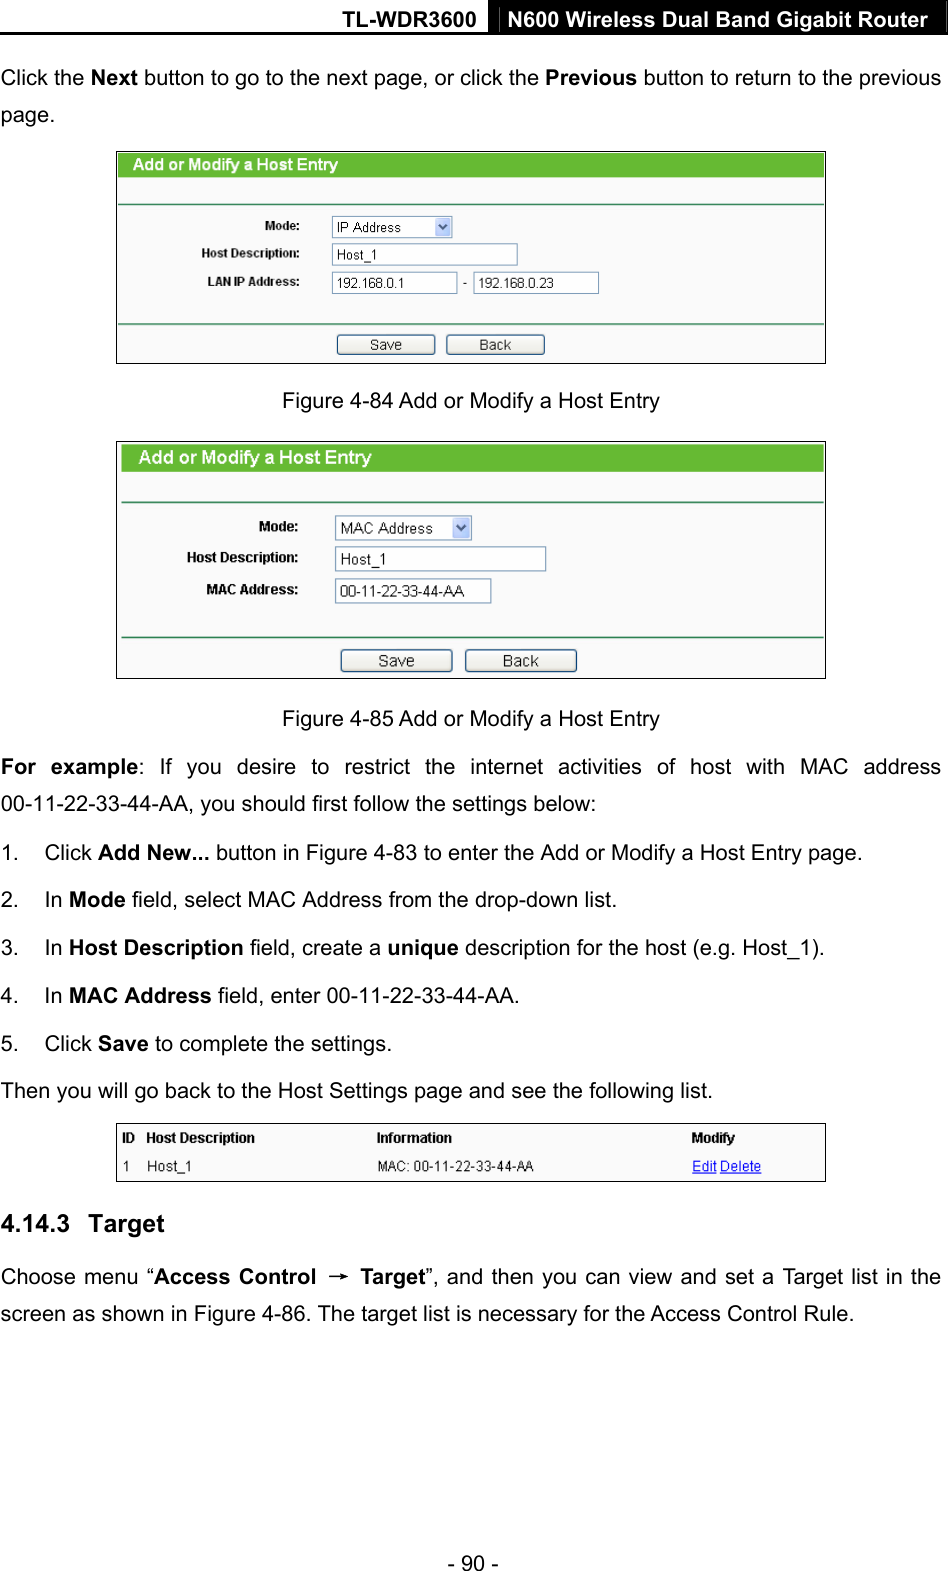 TL-WDR3600 N600 Wireless Dual Band Gigabit Router  - 90 - Click the Next button to go to the next page, or click the Previous button to return to the previous page.  Figure 4-84 Add or Modify a Host Entry  Figure 4-85 Add or Modify a Host Entry For example: If you desire to restrict the internet activities of host with MAC address 00-11-22-33-44-AA, you should first follow the settings below:   1. Click Add New... button in Figure 4-83 to enter the Add or Modify a Host Entry page.   2. In Mode field, select MAC Address from the drop-down list.   3. In Host Description field, create a unique description for the host (e.g. Host_1).   4. In MAC Address field, enter 00-11-22-33-44-AA.   5. Click Save to complete the settings.   Then you will go back to the Host Settings page and see the following list.  4.14.3  Target Choose menu “Access Control  → Target”, and then you can view and set a Target list in the screen as shown in Figure 4-86. The target list is necessary for the Access Control Rule. 